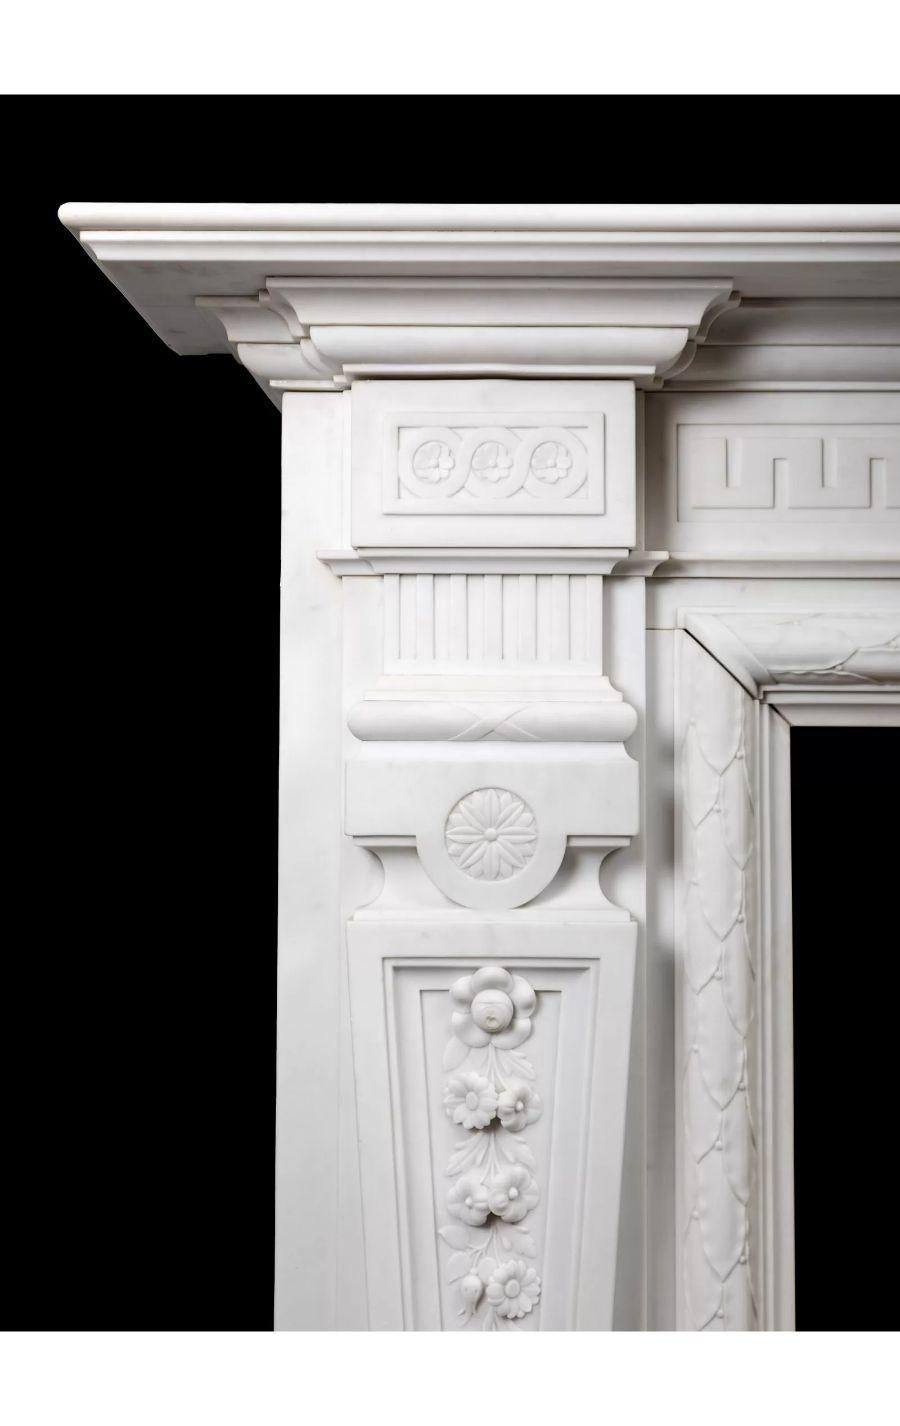 A large English antique carved white Statuary marble fireplace from the late Victorian/Edwardian period.

A very well proportioned and attractive fireplace which was made approximately 120 years ago using the purest imported Italian Statuary marble.